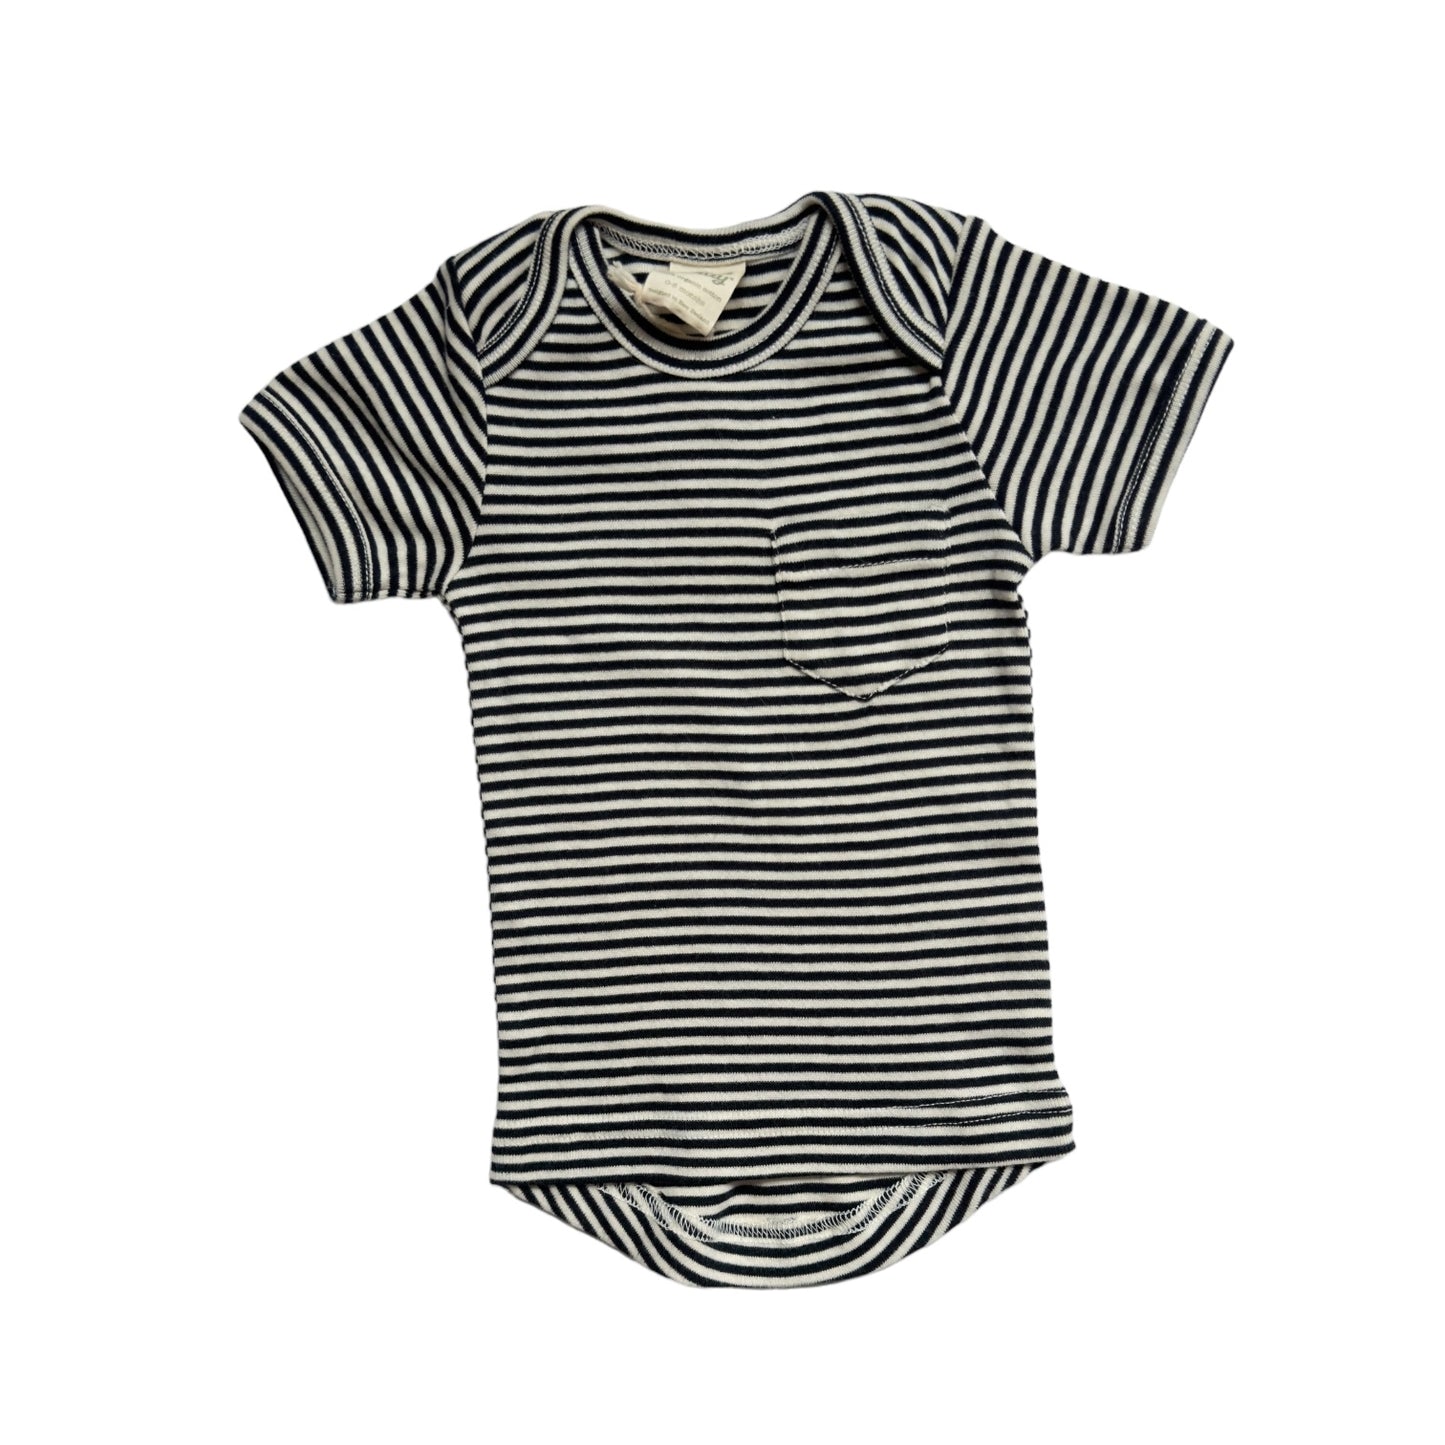 Nature Baby t-shirt | 0-3 months| blue & white stripped | BN | Organic cotton